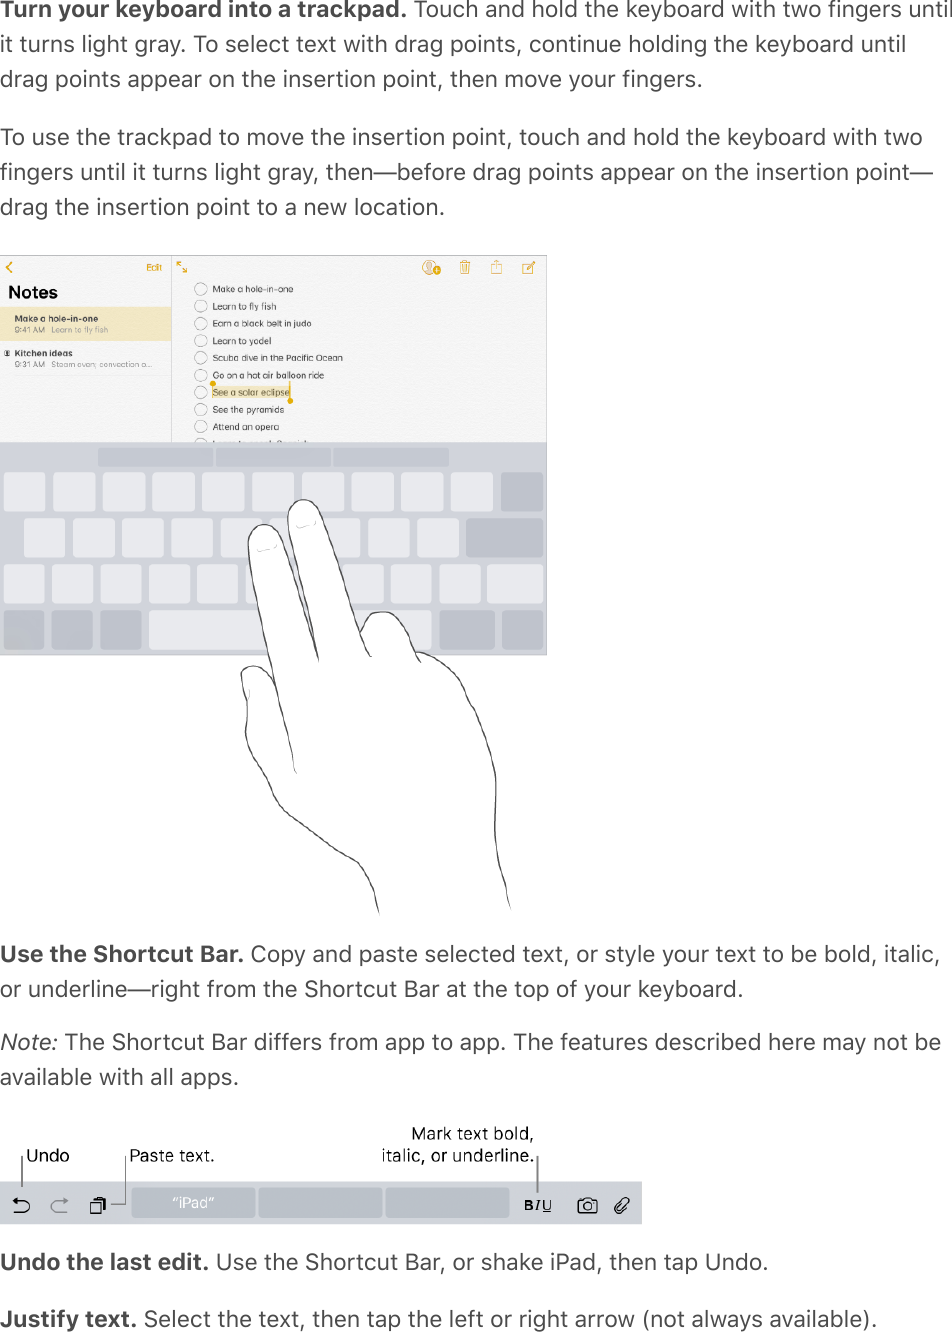 Turn your keyboard into a trackpad. Touch and hold the keyboard with two fingers untilit turns light gray. To select text with drag points, continue holding the keyboard untildrag points appear on the insertion point, then move your fingers.To use the trackpad to move the insertion point, touch and hold the keyboard with twofingers until it turns light gray, then—before drag points appear on the insertion point—drag the insertion point to a new location.Use the Shortcut Bar. Copy and paste selected text, or style your text to be bold, italic,or underline—right from the Shortcut Bar at the top of your keyboard.Note: The Shortcut Bar differs from app to app. The features described here may not beavailable with all apps.Undo the last edit. Use the Shortcut Bar, or shake iPad, then tap Undo.Justify text. Select the text, then tap the left or right arrow (not always available).